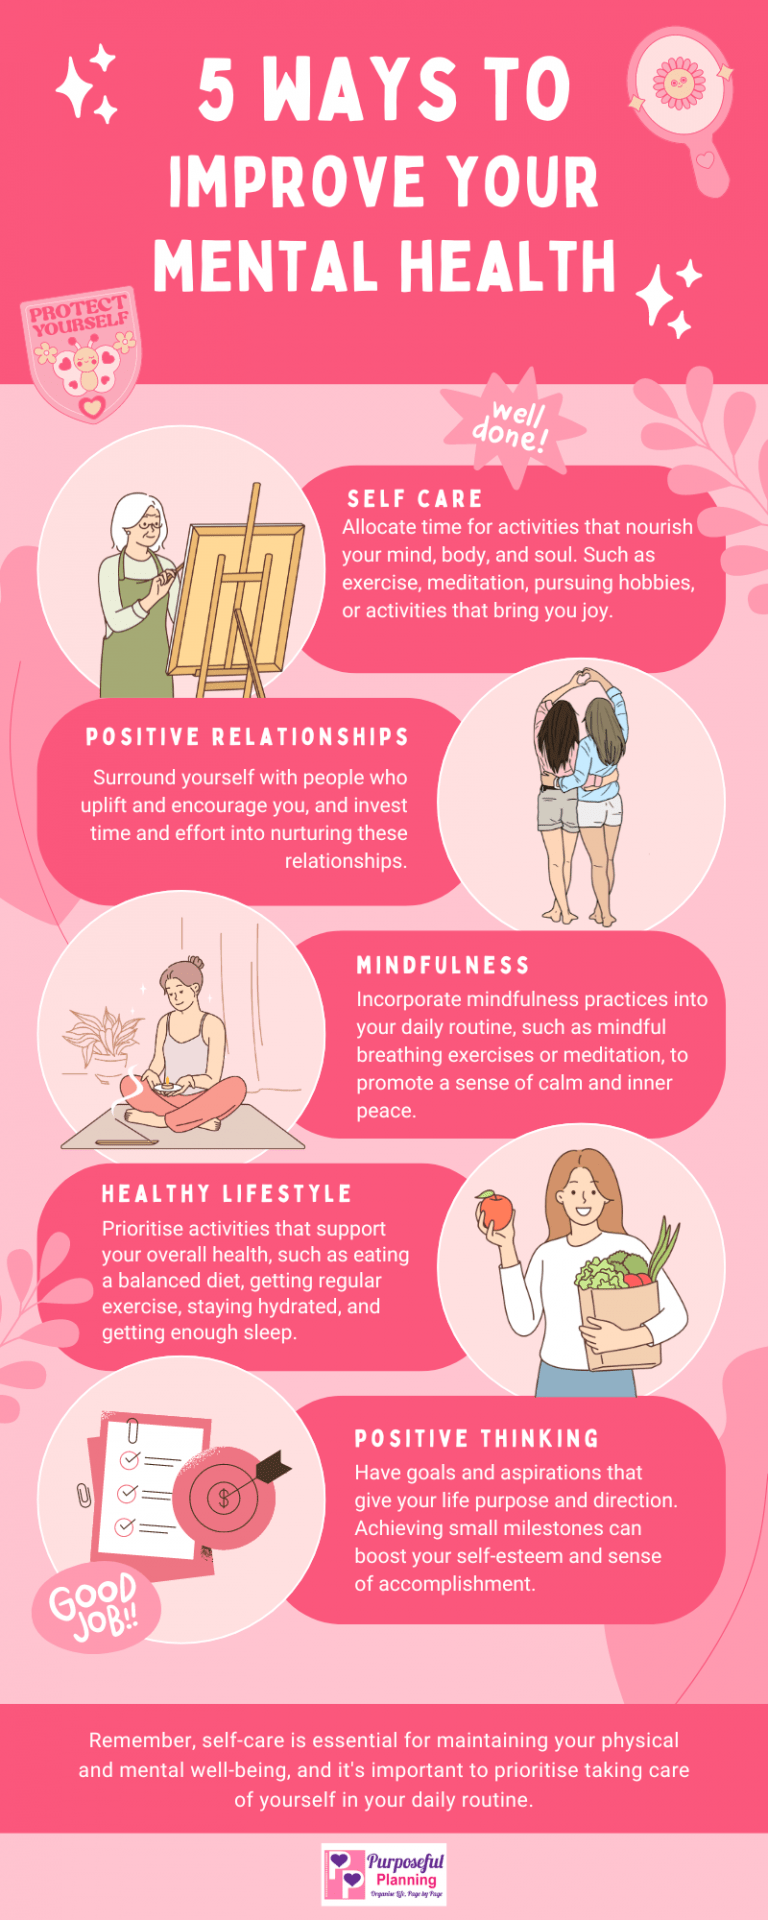 5 Ways to Improve your Mental Health Infographic